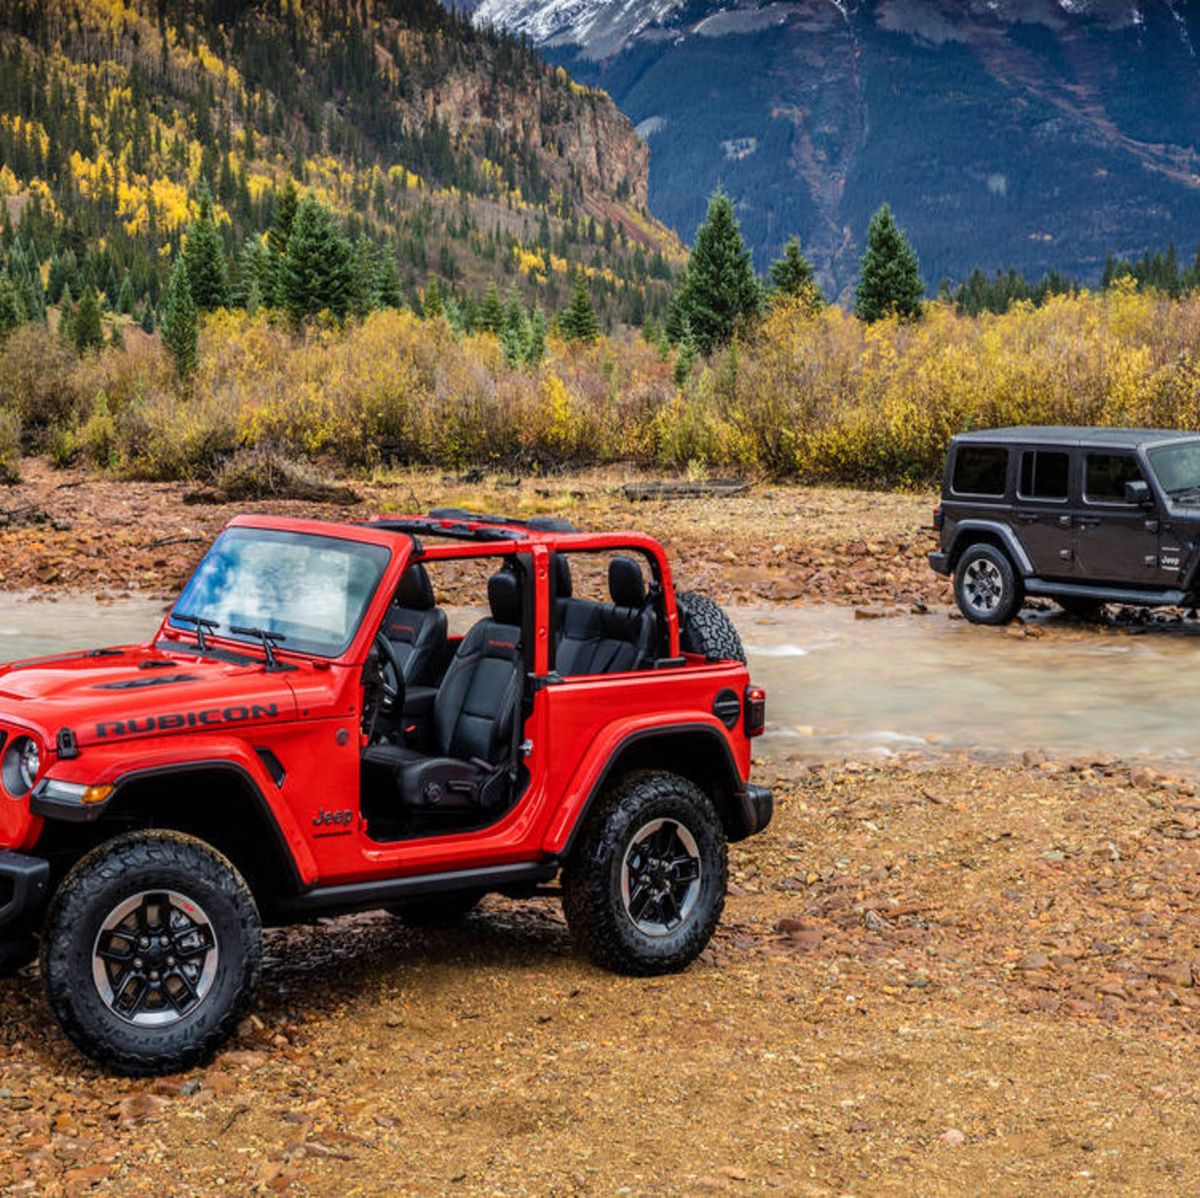 9 Reasons Why the 2018 Jeep Wrangler Rubicon JL Is Killer Off-Road